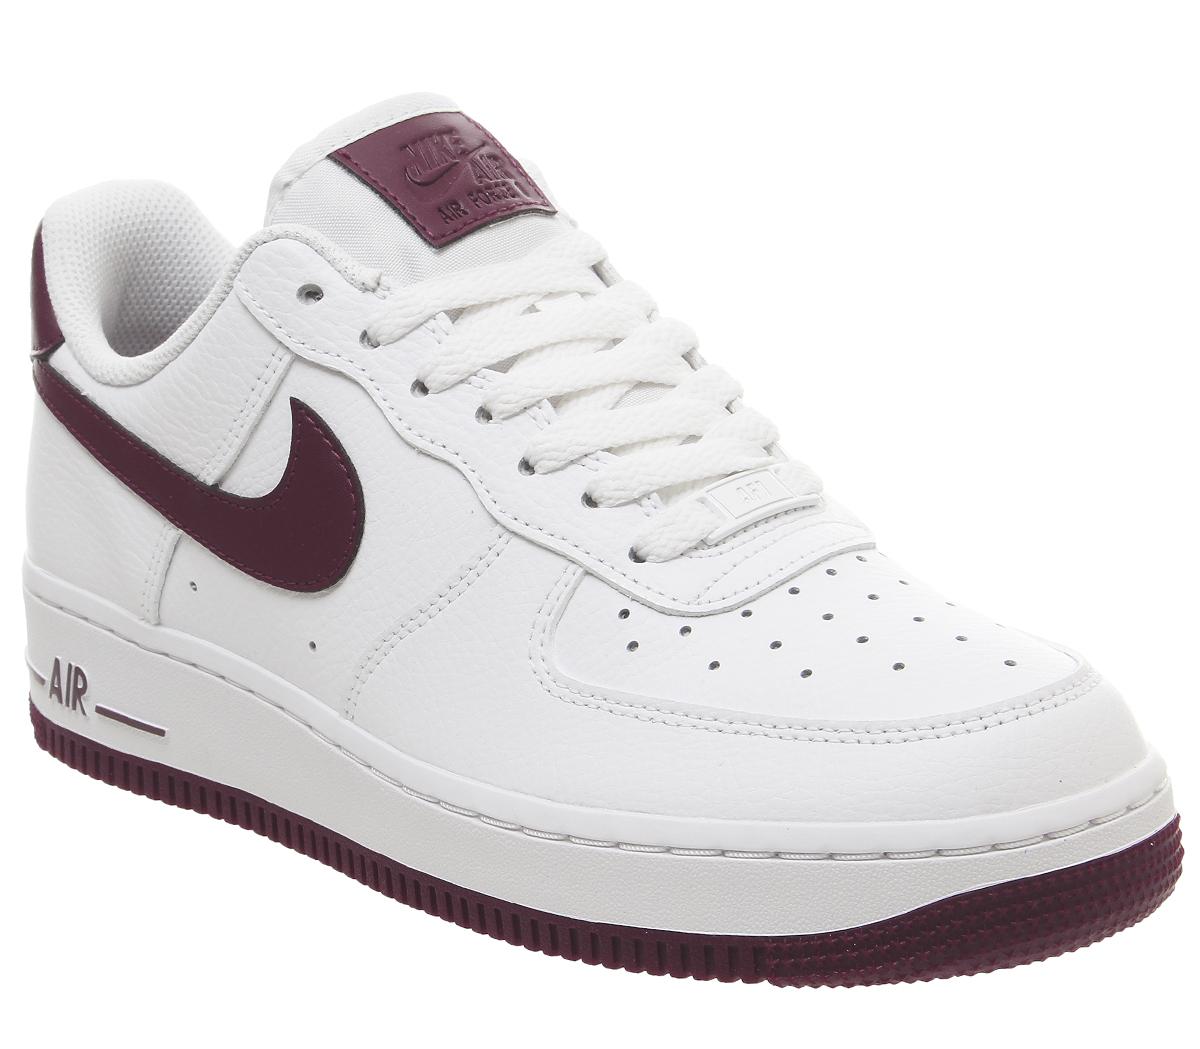 Nike Air Force 1 07 Trainers White Bordeaux - Hers trainers